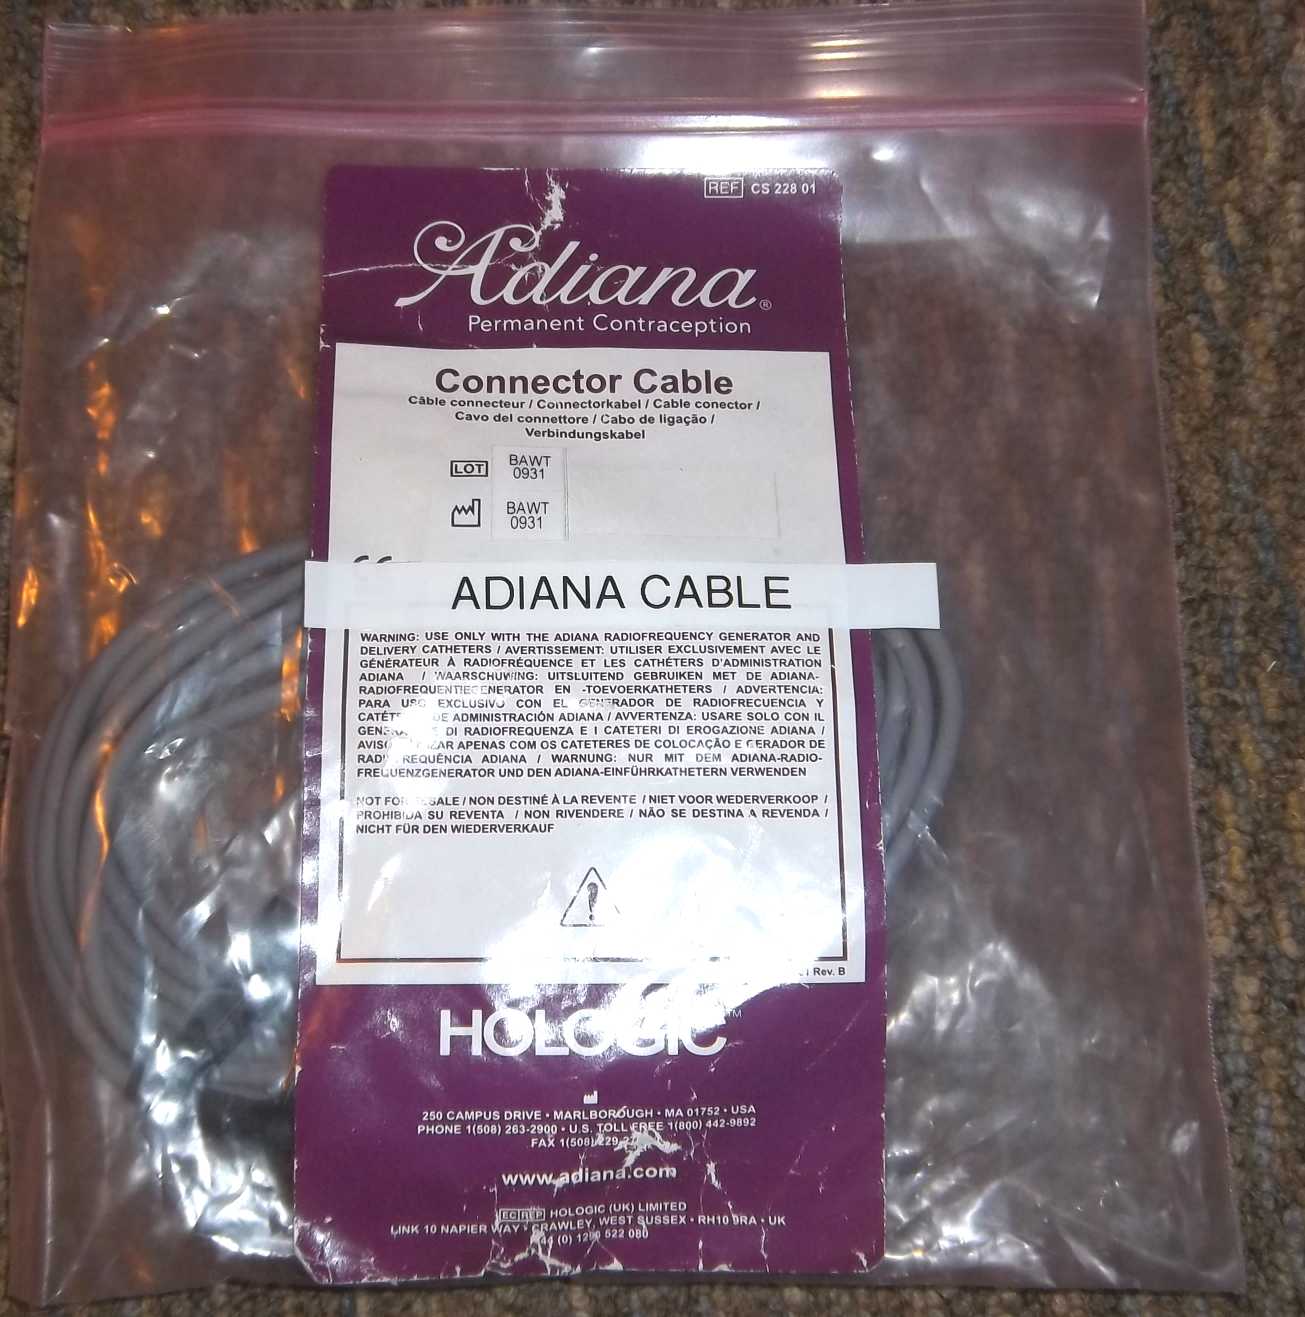 Used Adiana connector cable from Hologic cables